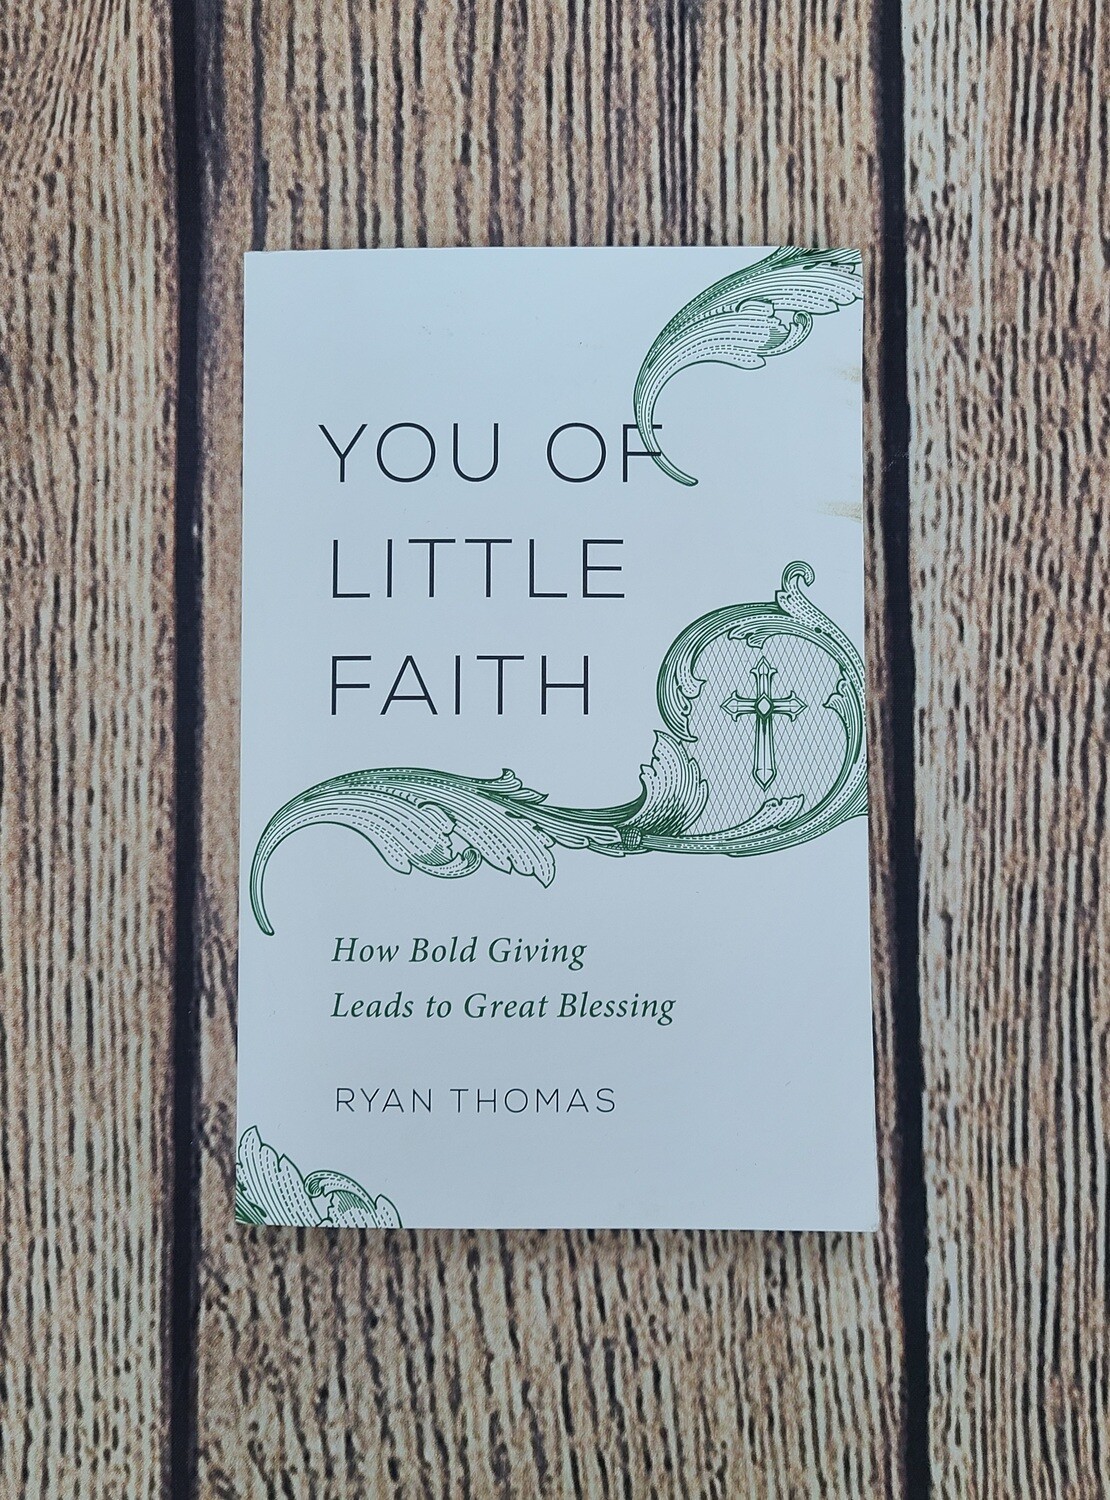 You of Little Faith: How Bold Giving Leads to Great Blessing by Ryan Thomas